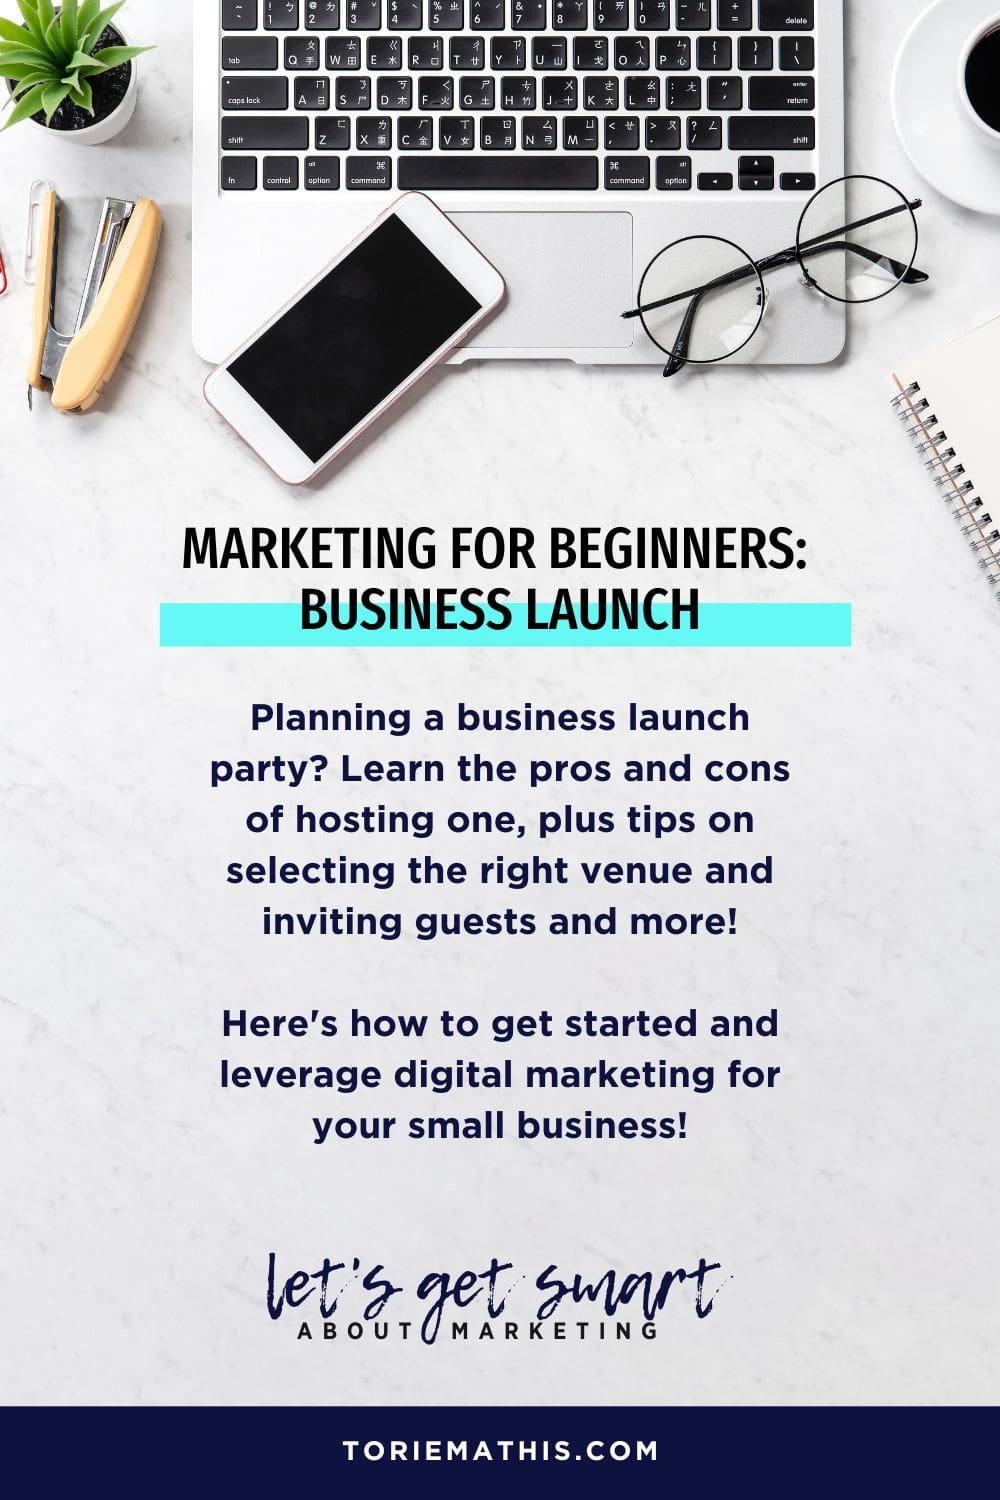 Hosting a Successful Business Launch Party Pros and Cons